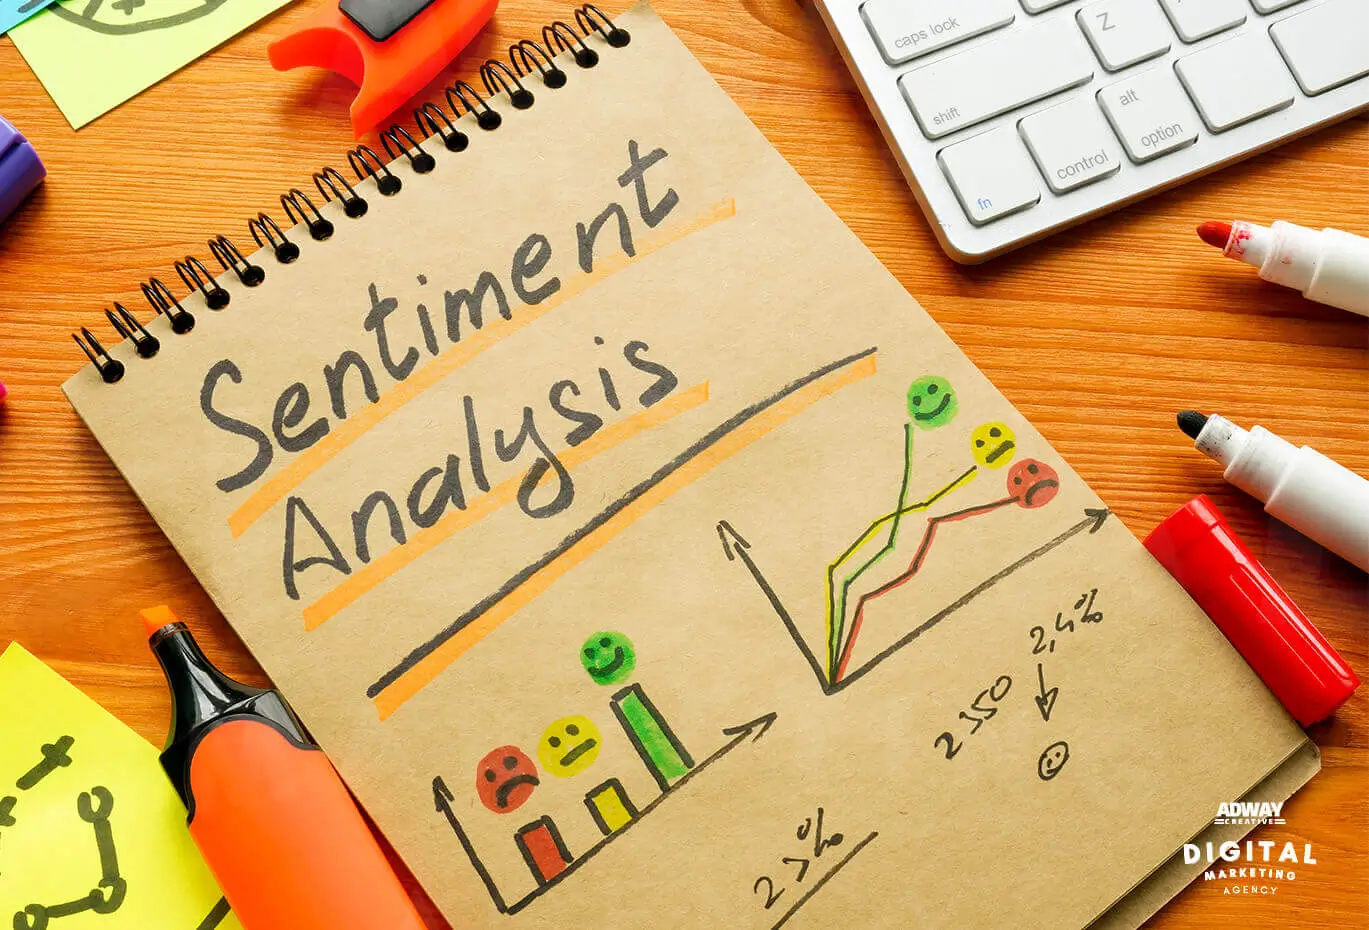 Why are Sentiment and Semantic Analysis Important